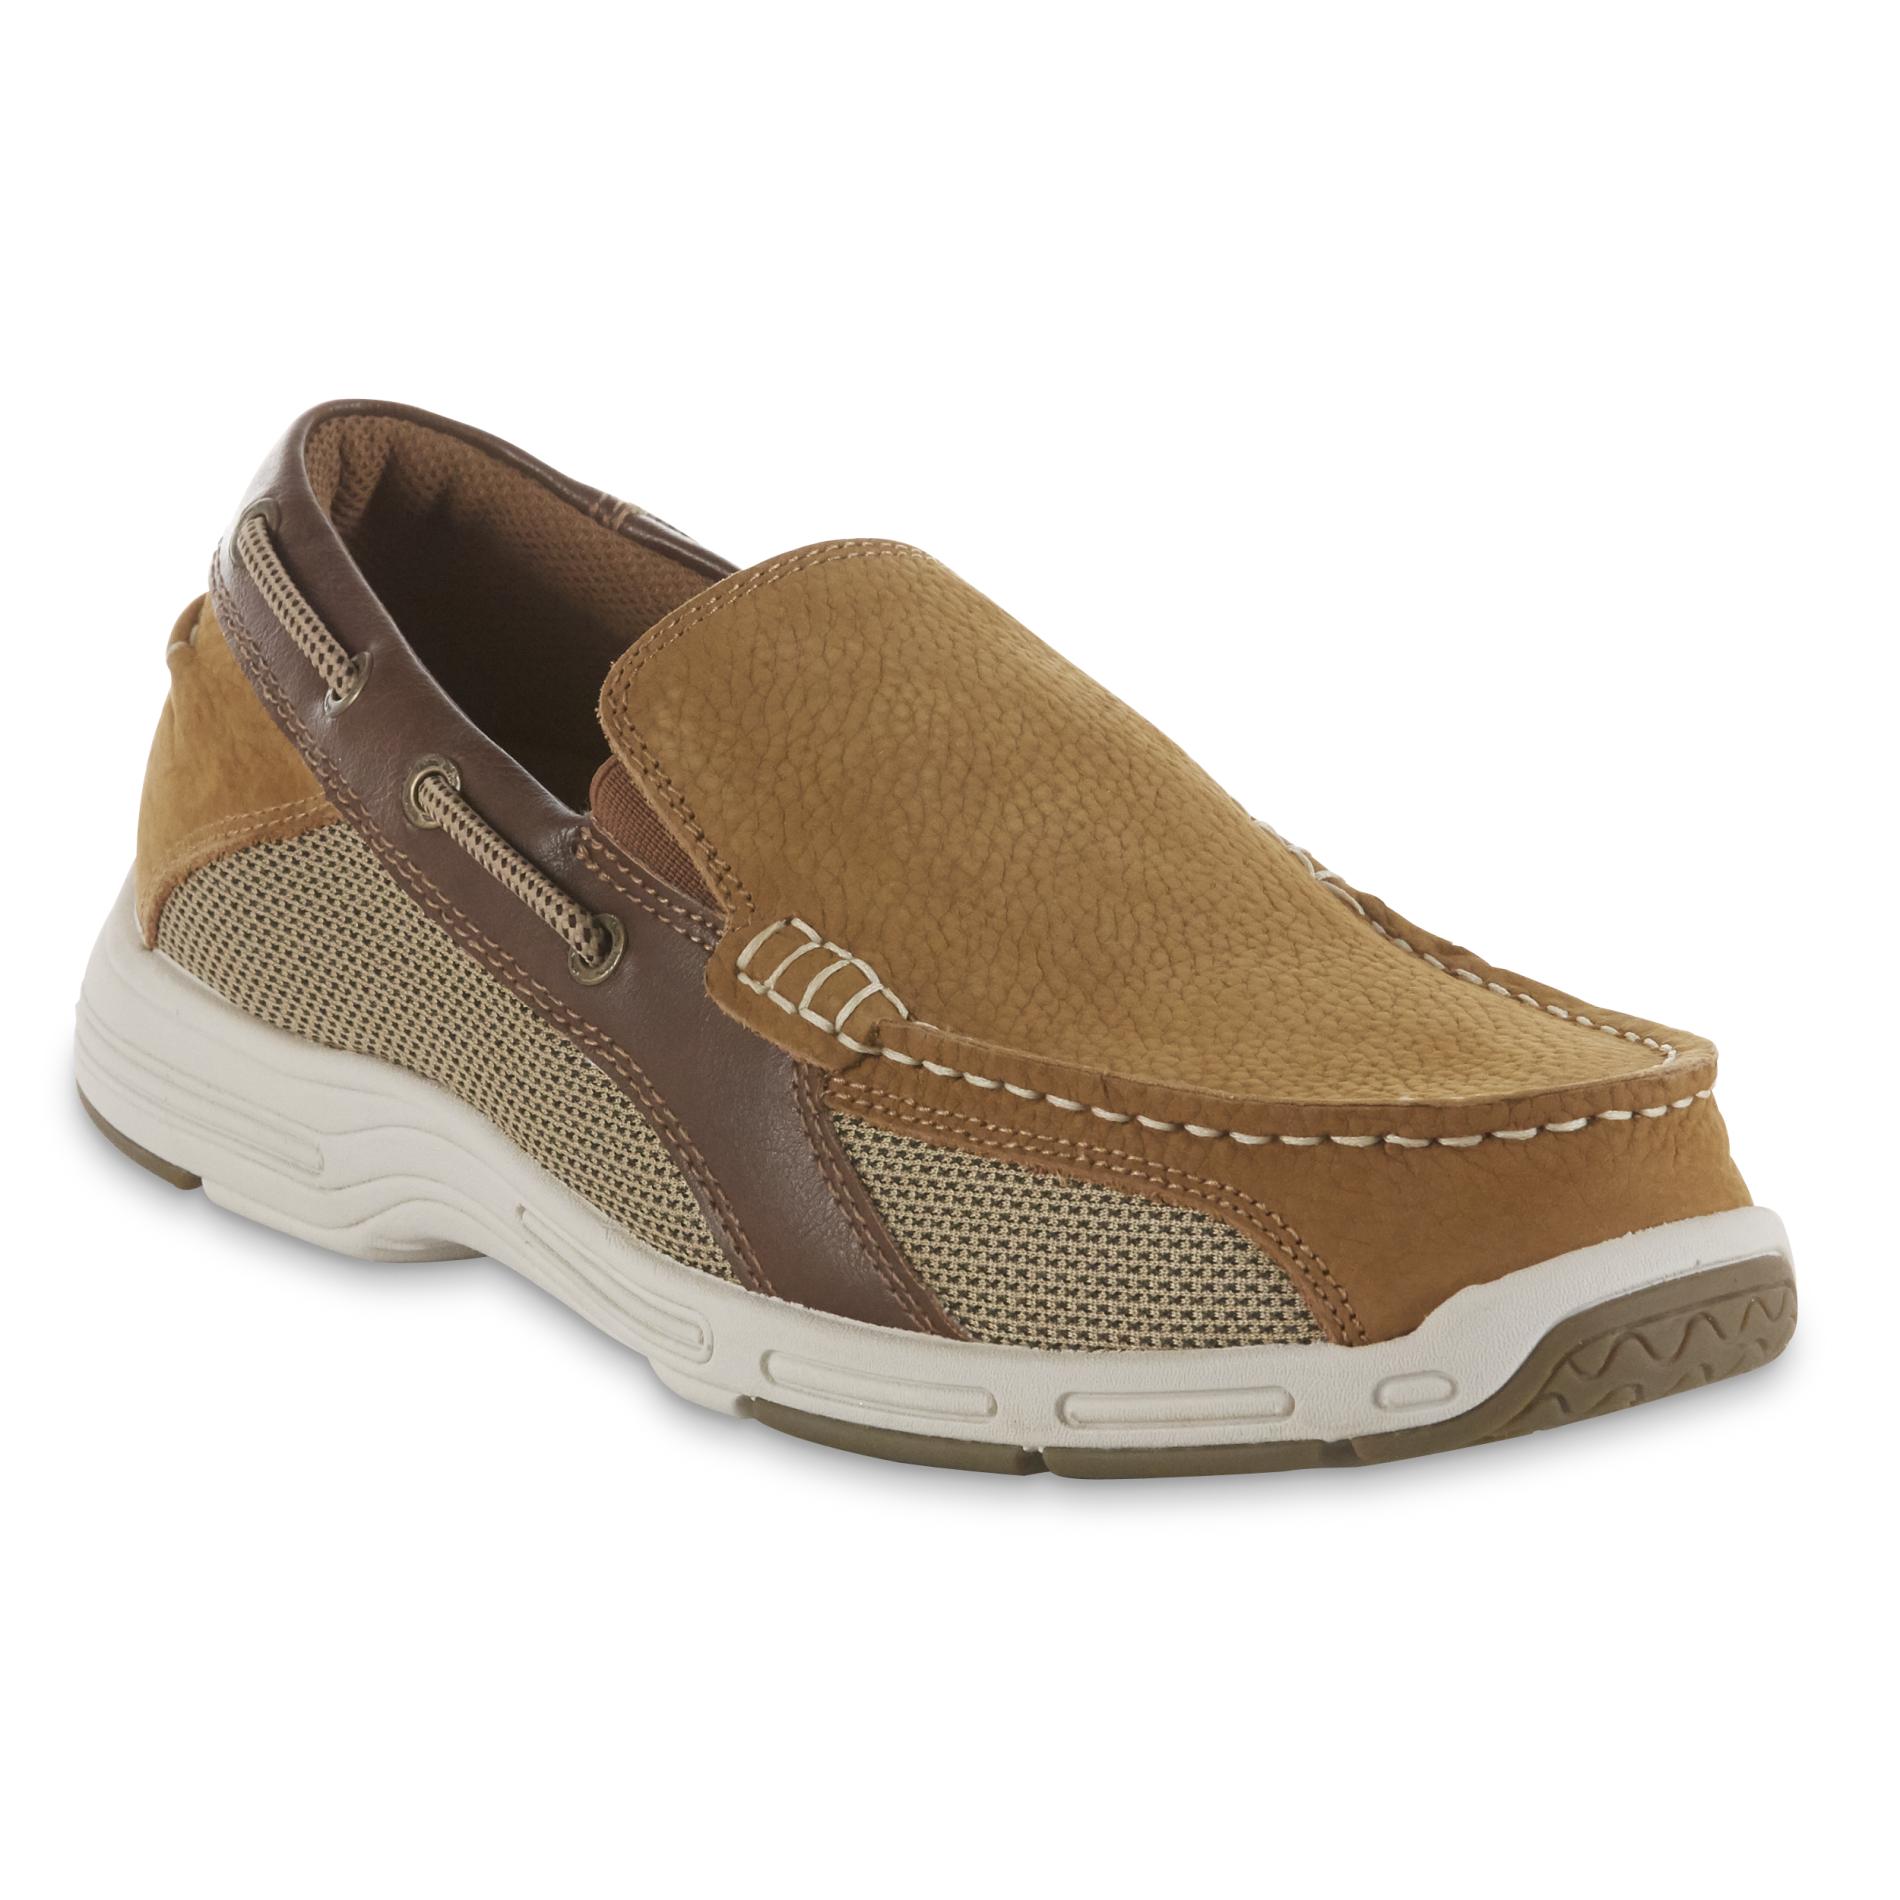 sears mens casual shoes